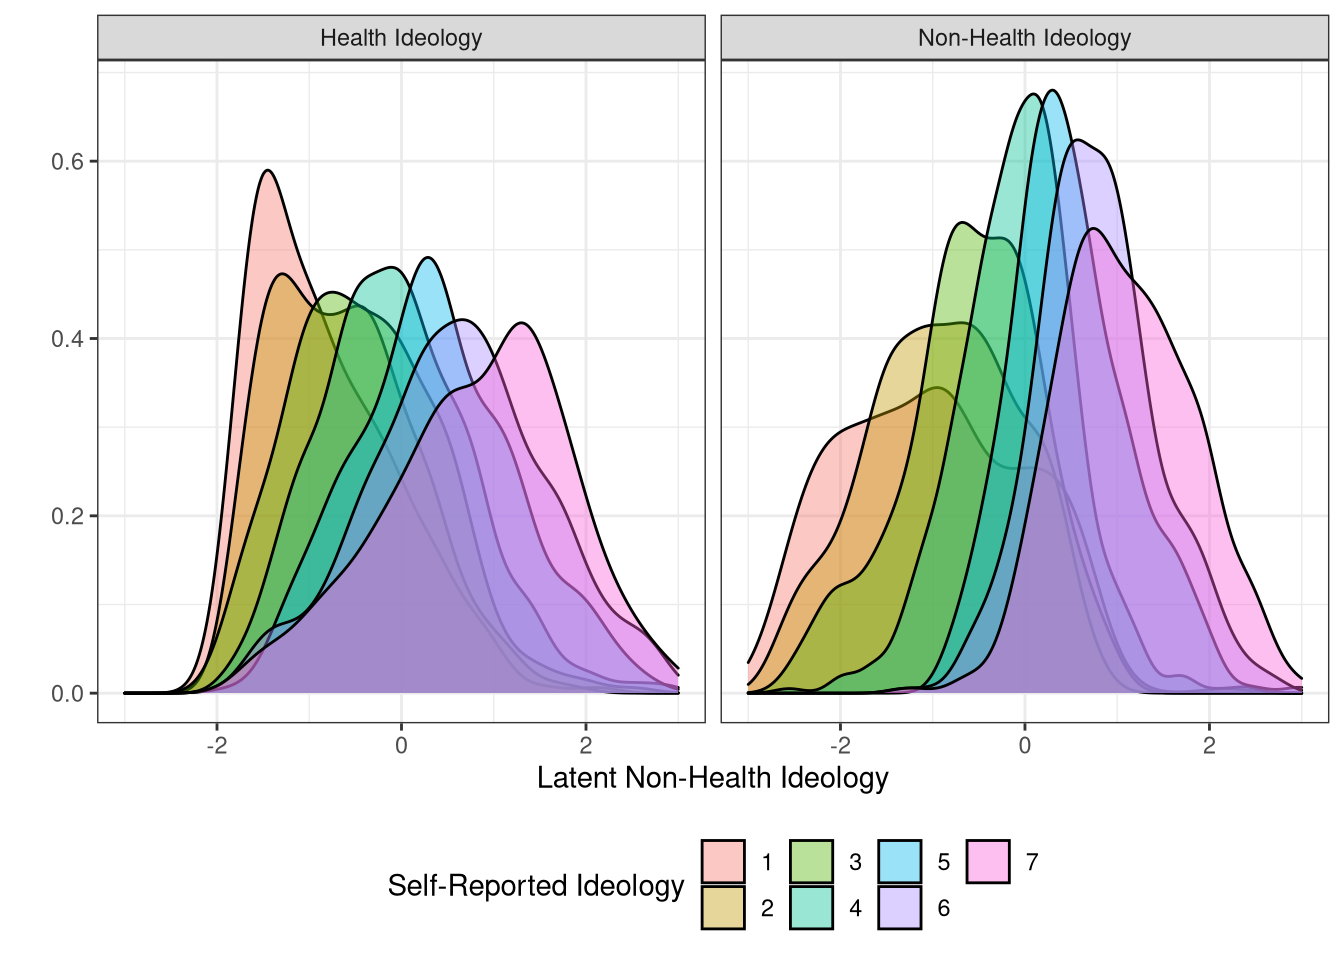 Health and Non-health latent ideology by 7-category self-reported ideology